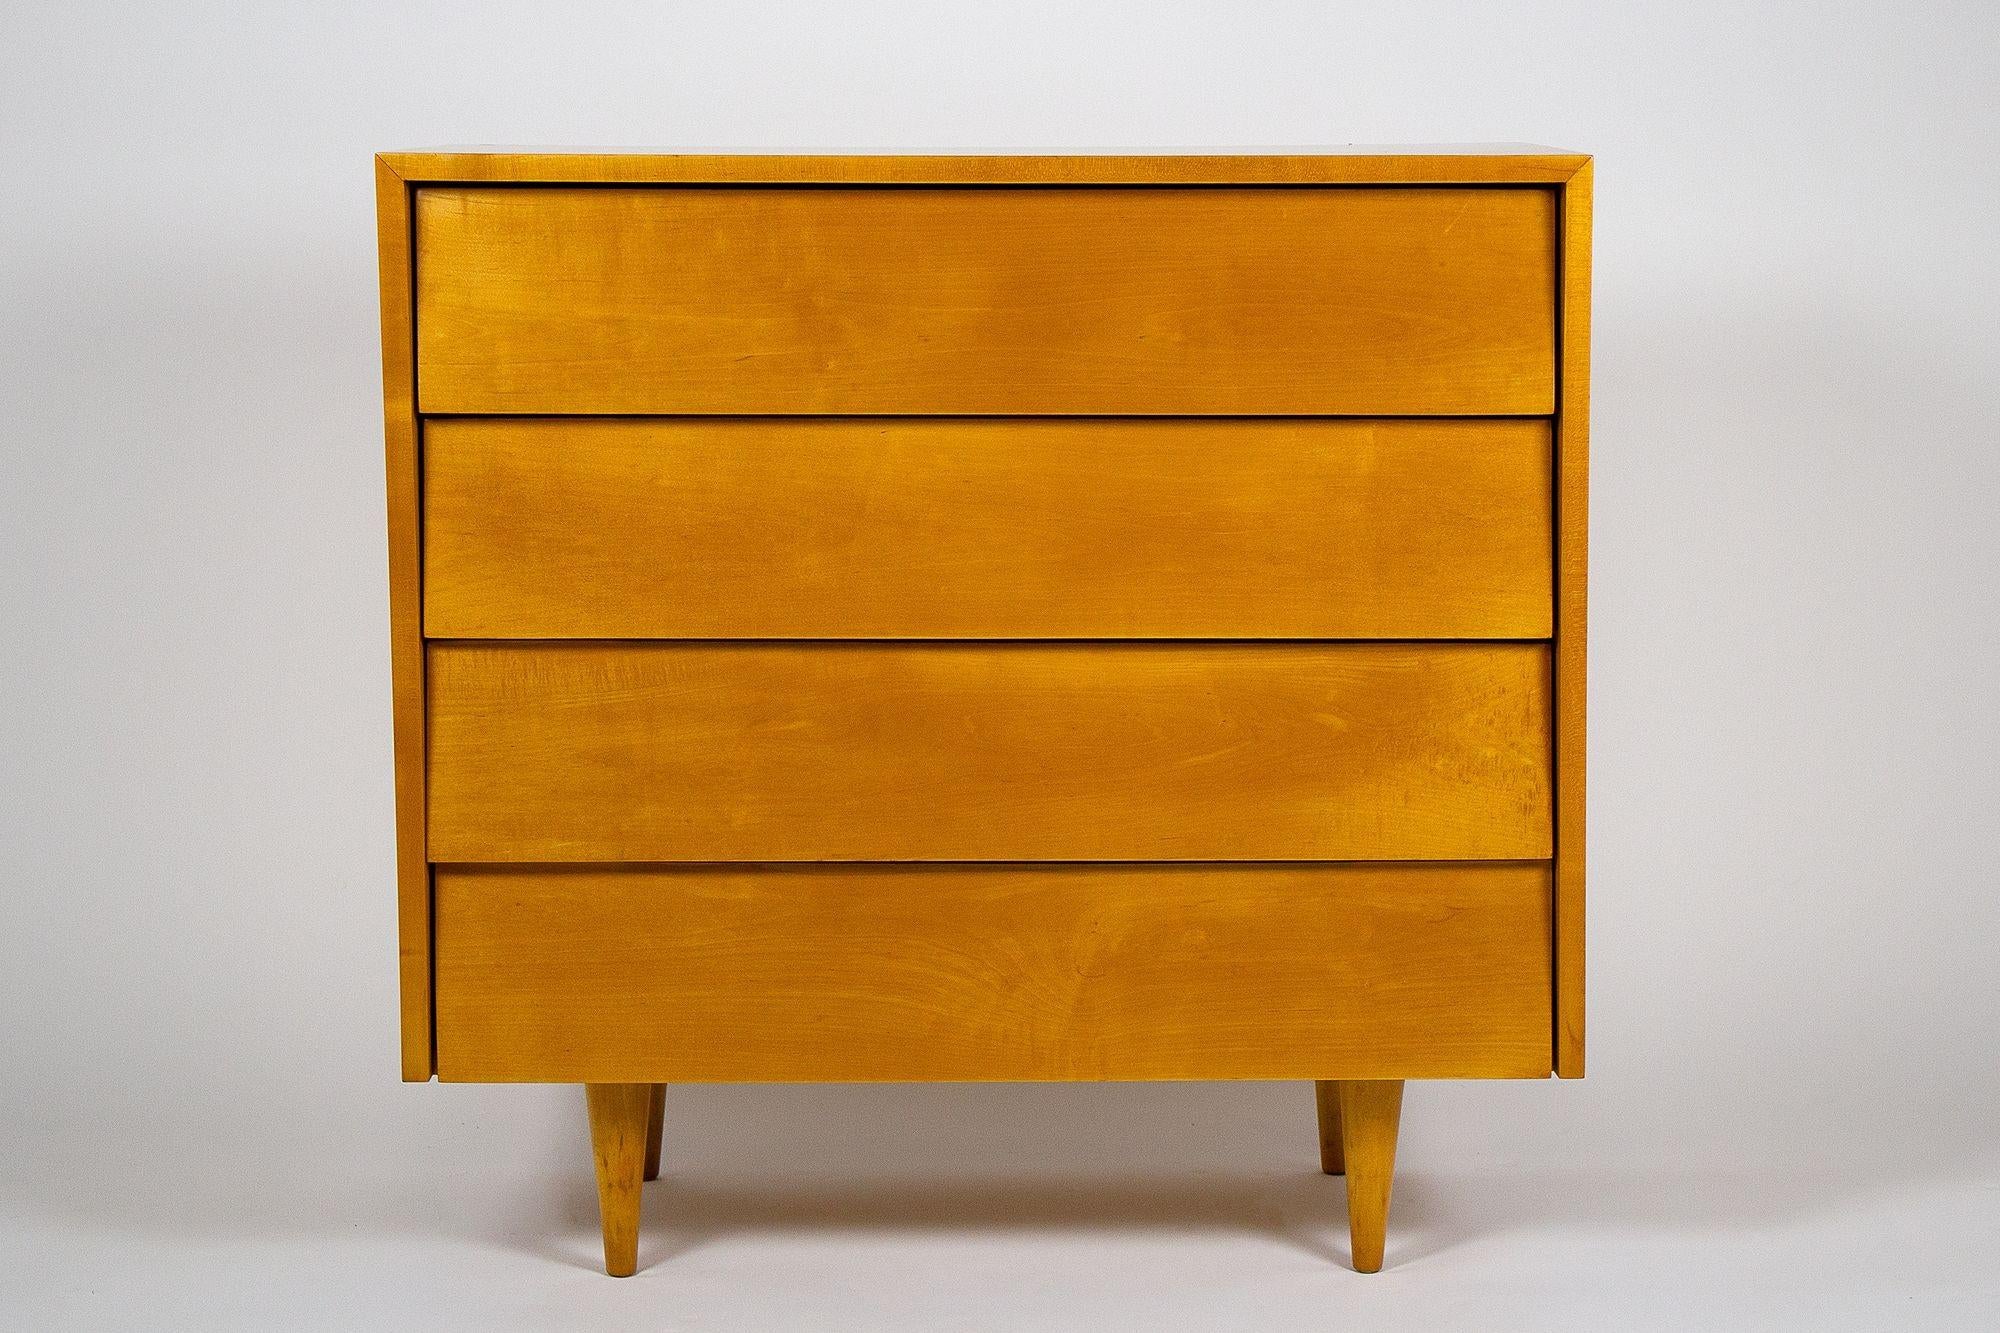 Pair of four drawer chests designed by Florence Knoll, 1948 for Knoll International.